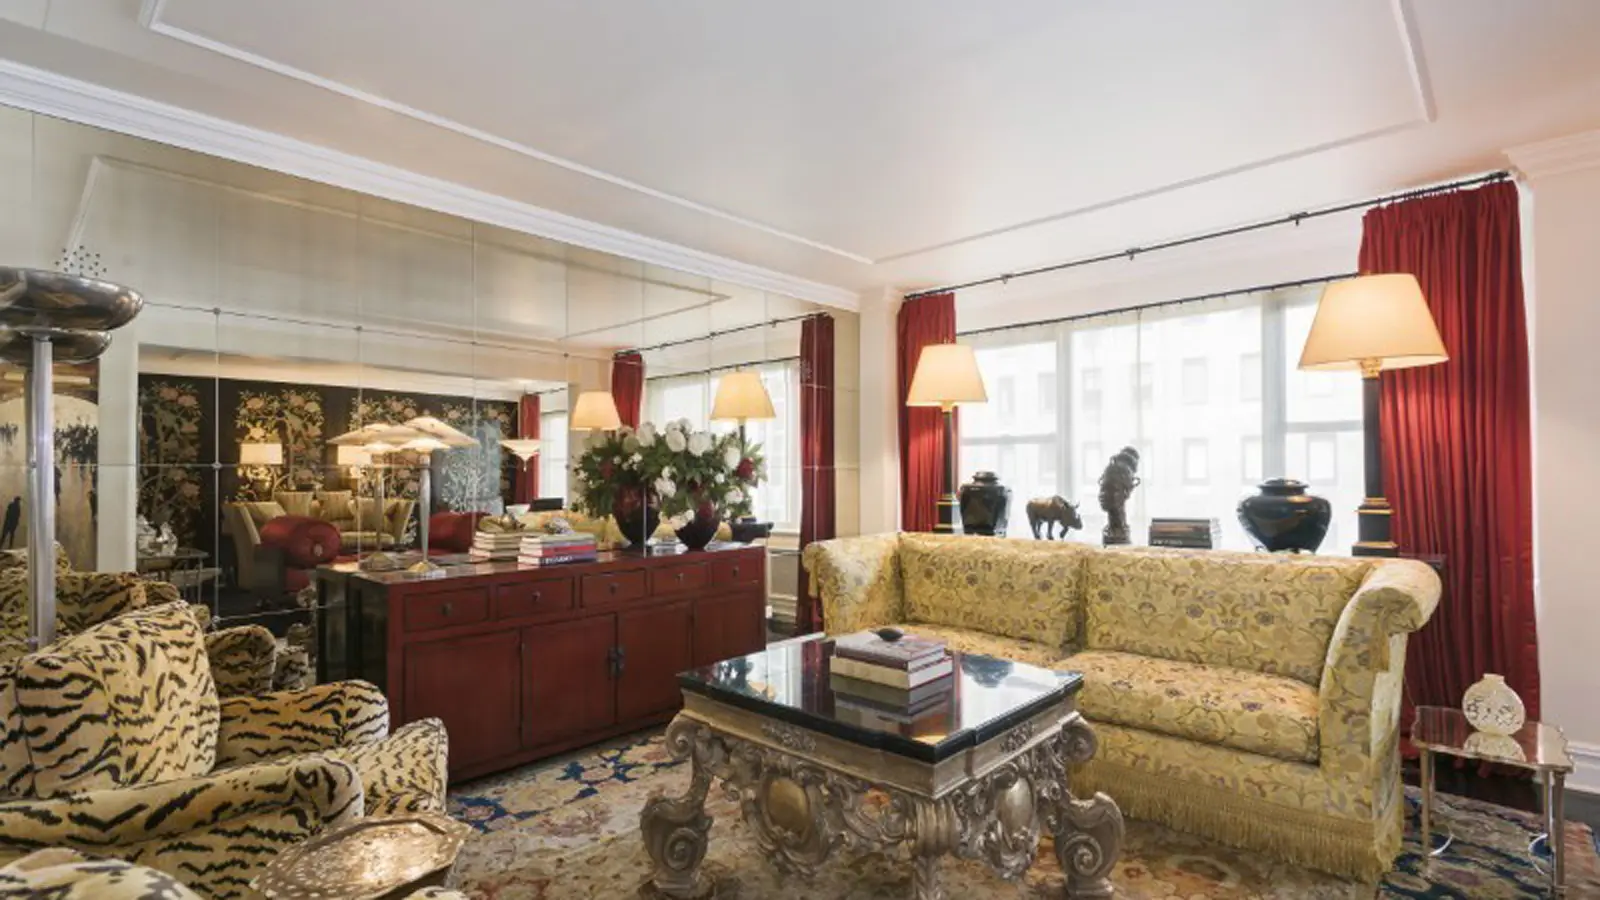 The Dorchester, 110 East 57th Street